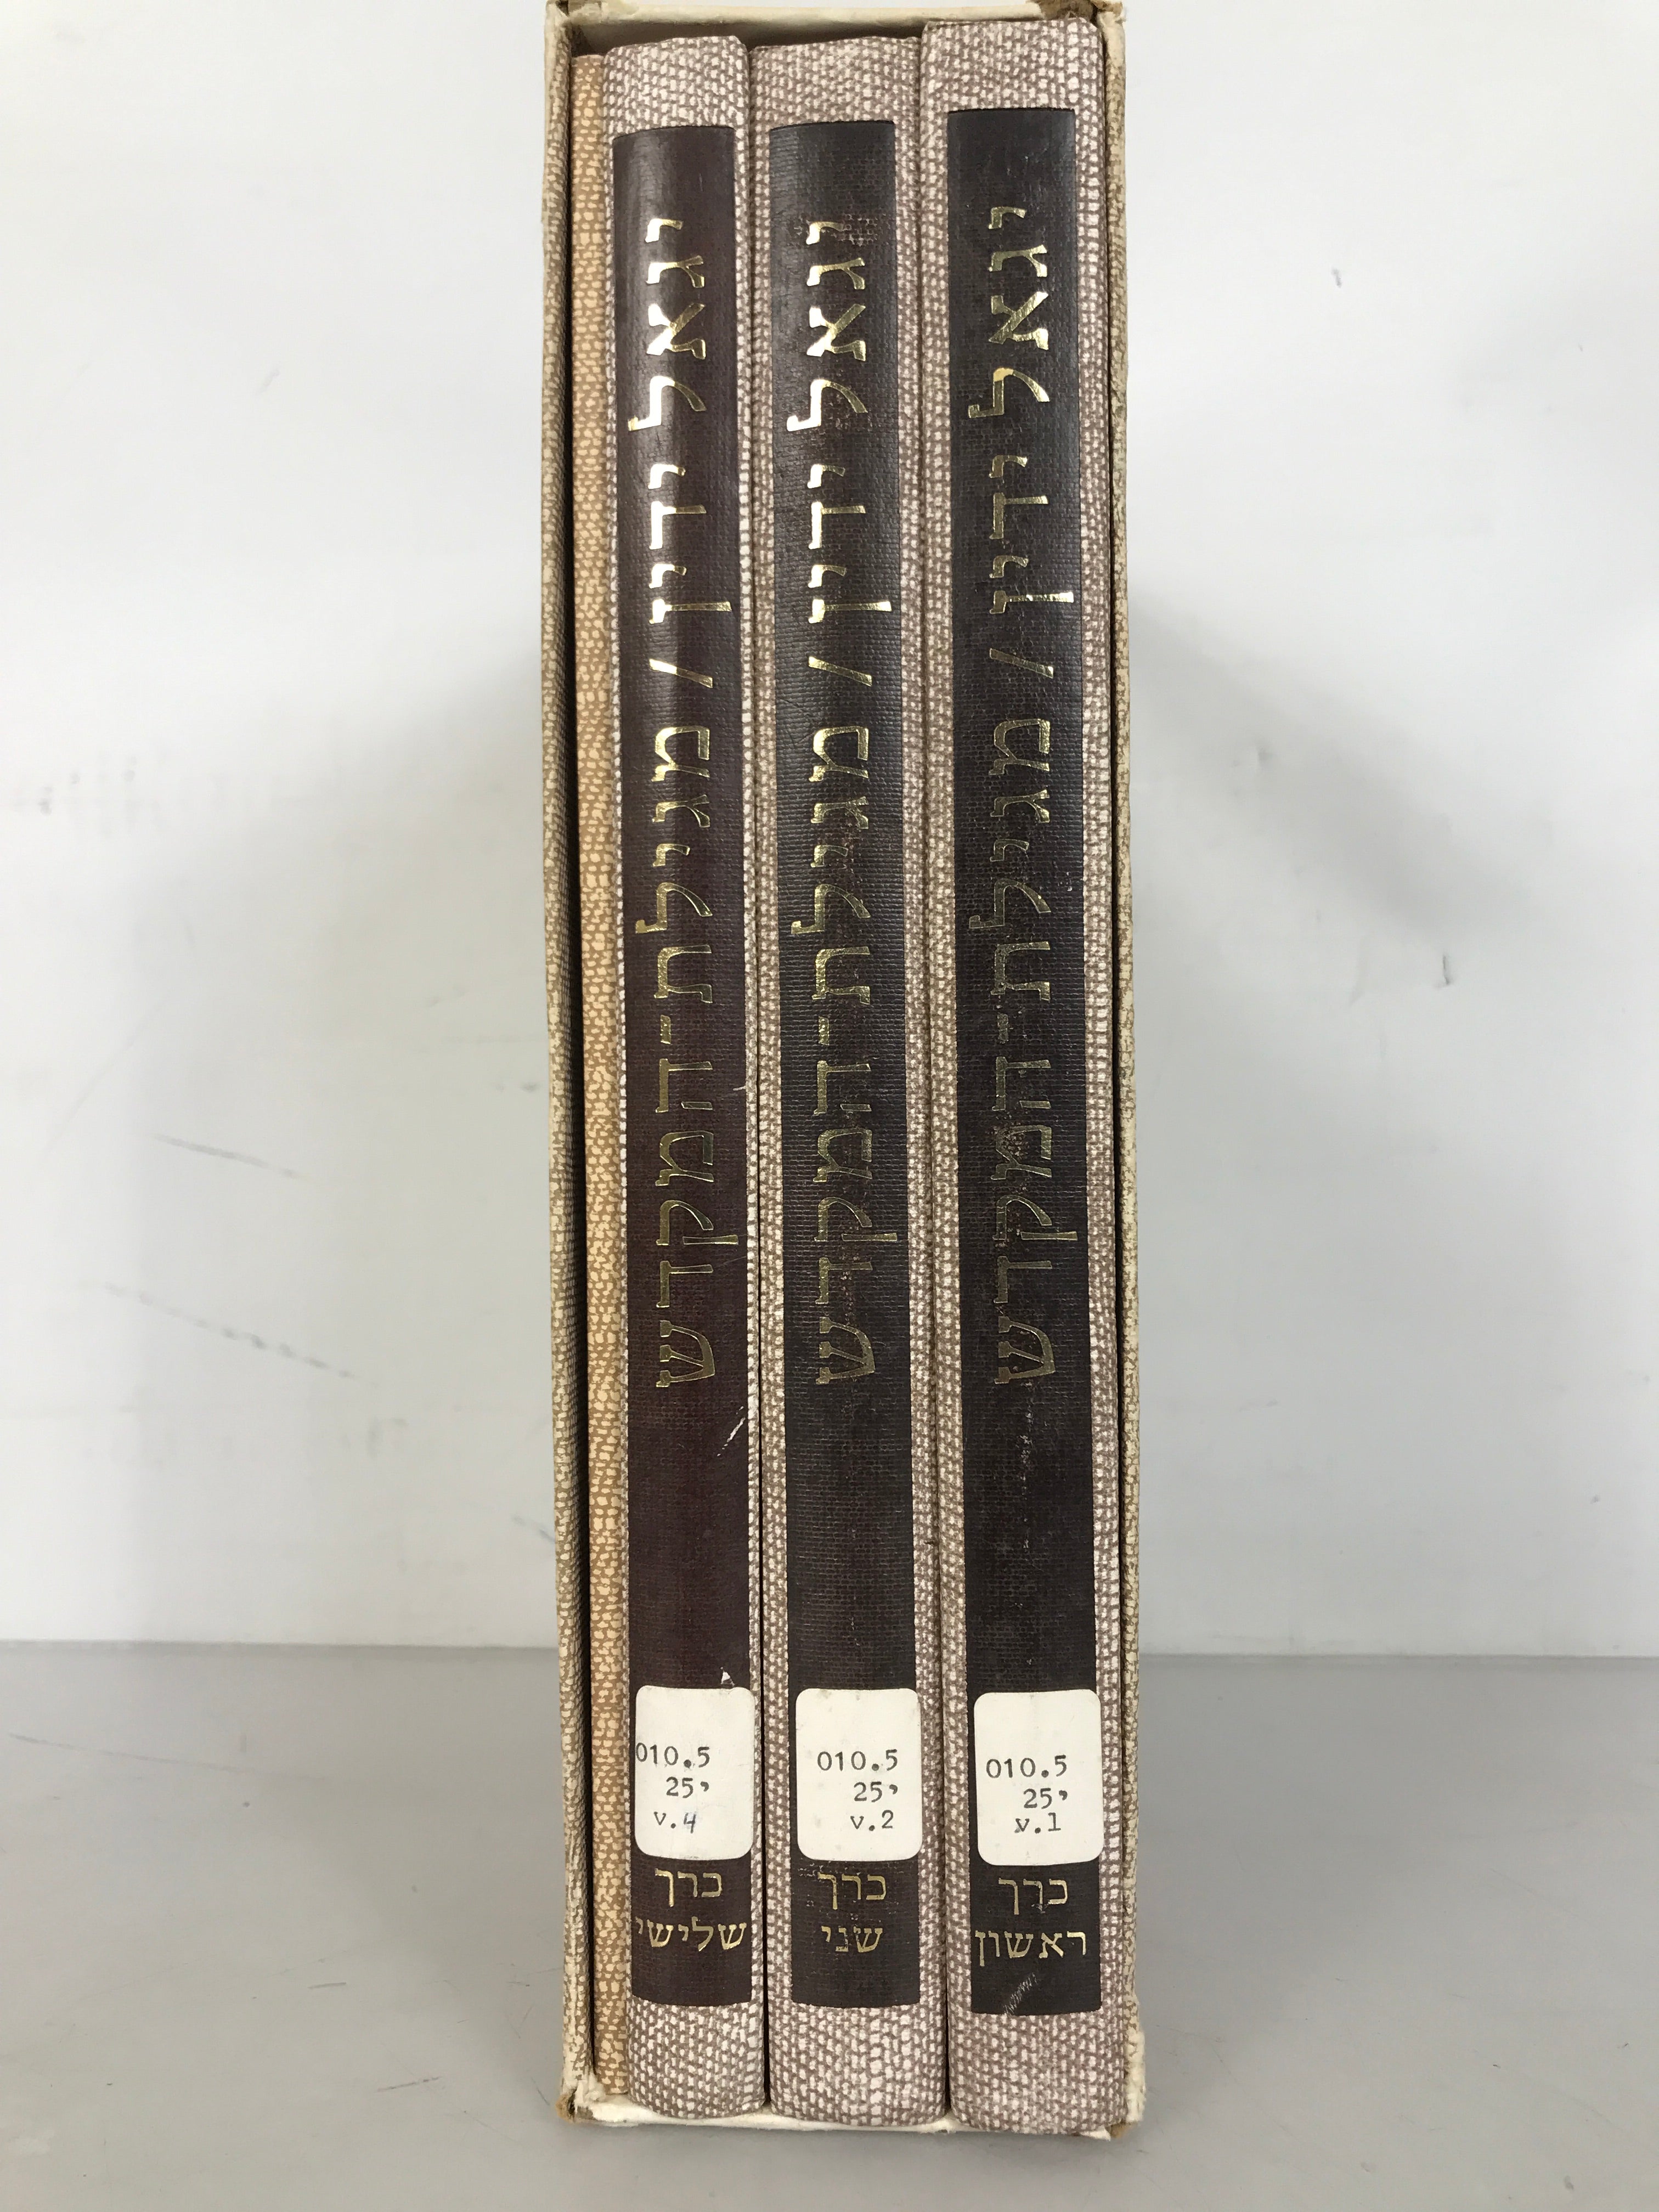 Three Volume Set of The Temple Scroll Hebrew Edition with Supplementary Plates in Slipcase by Yigael Yadin 1977 HC